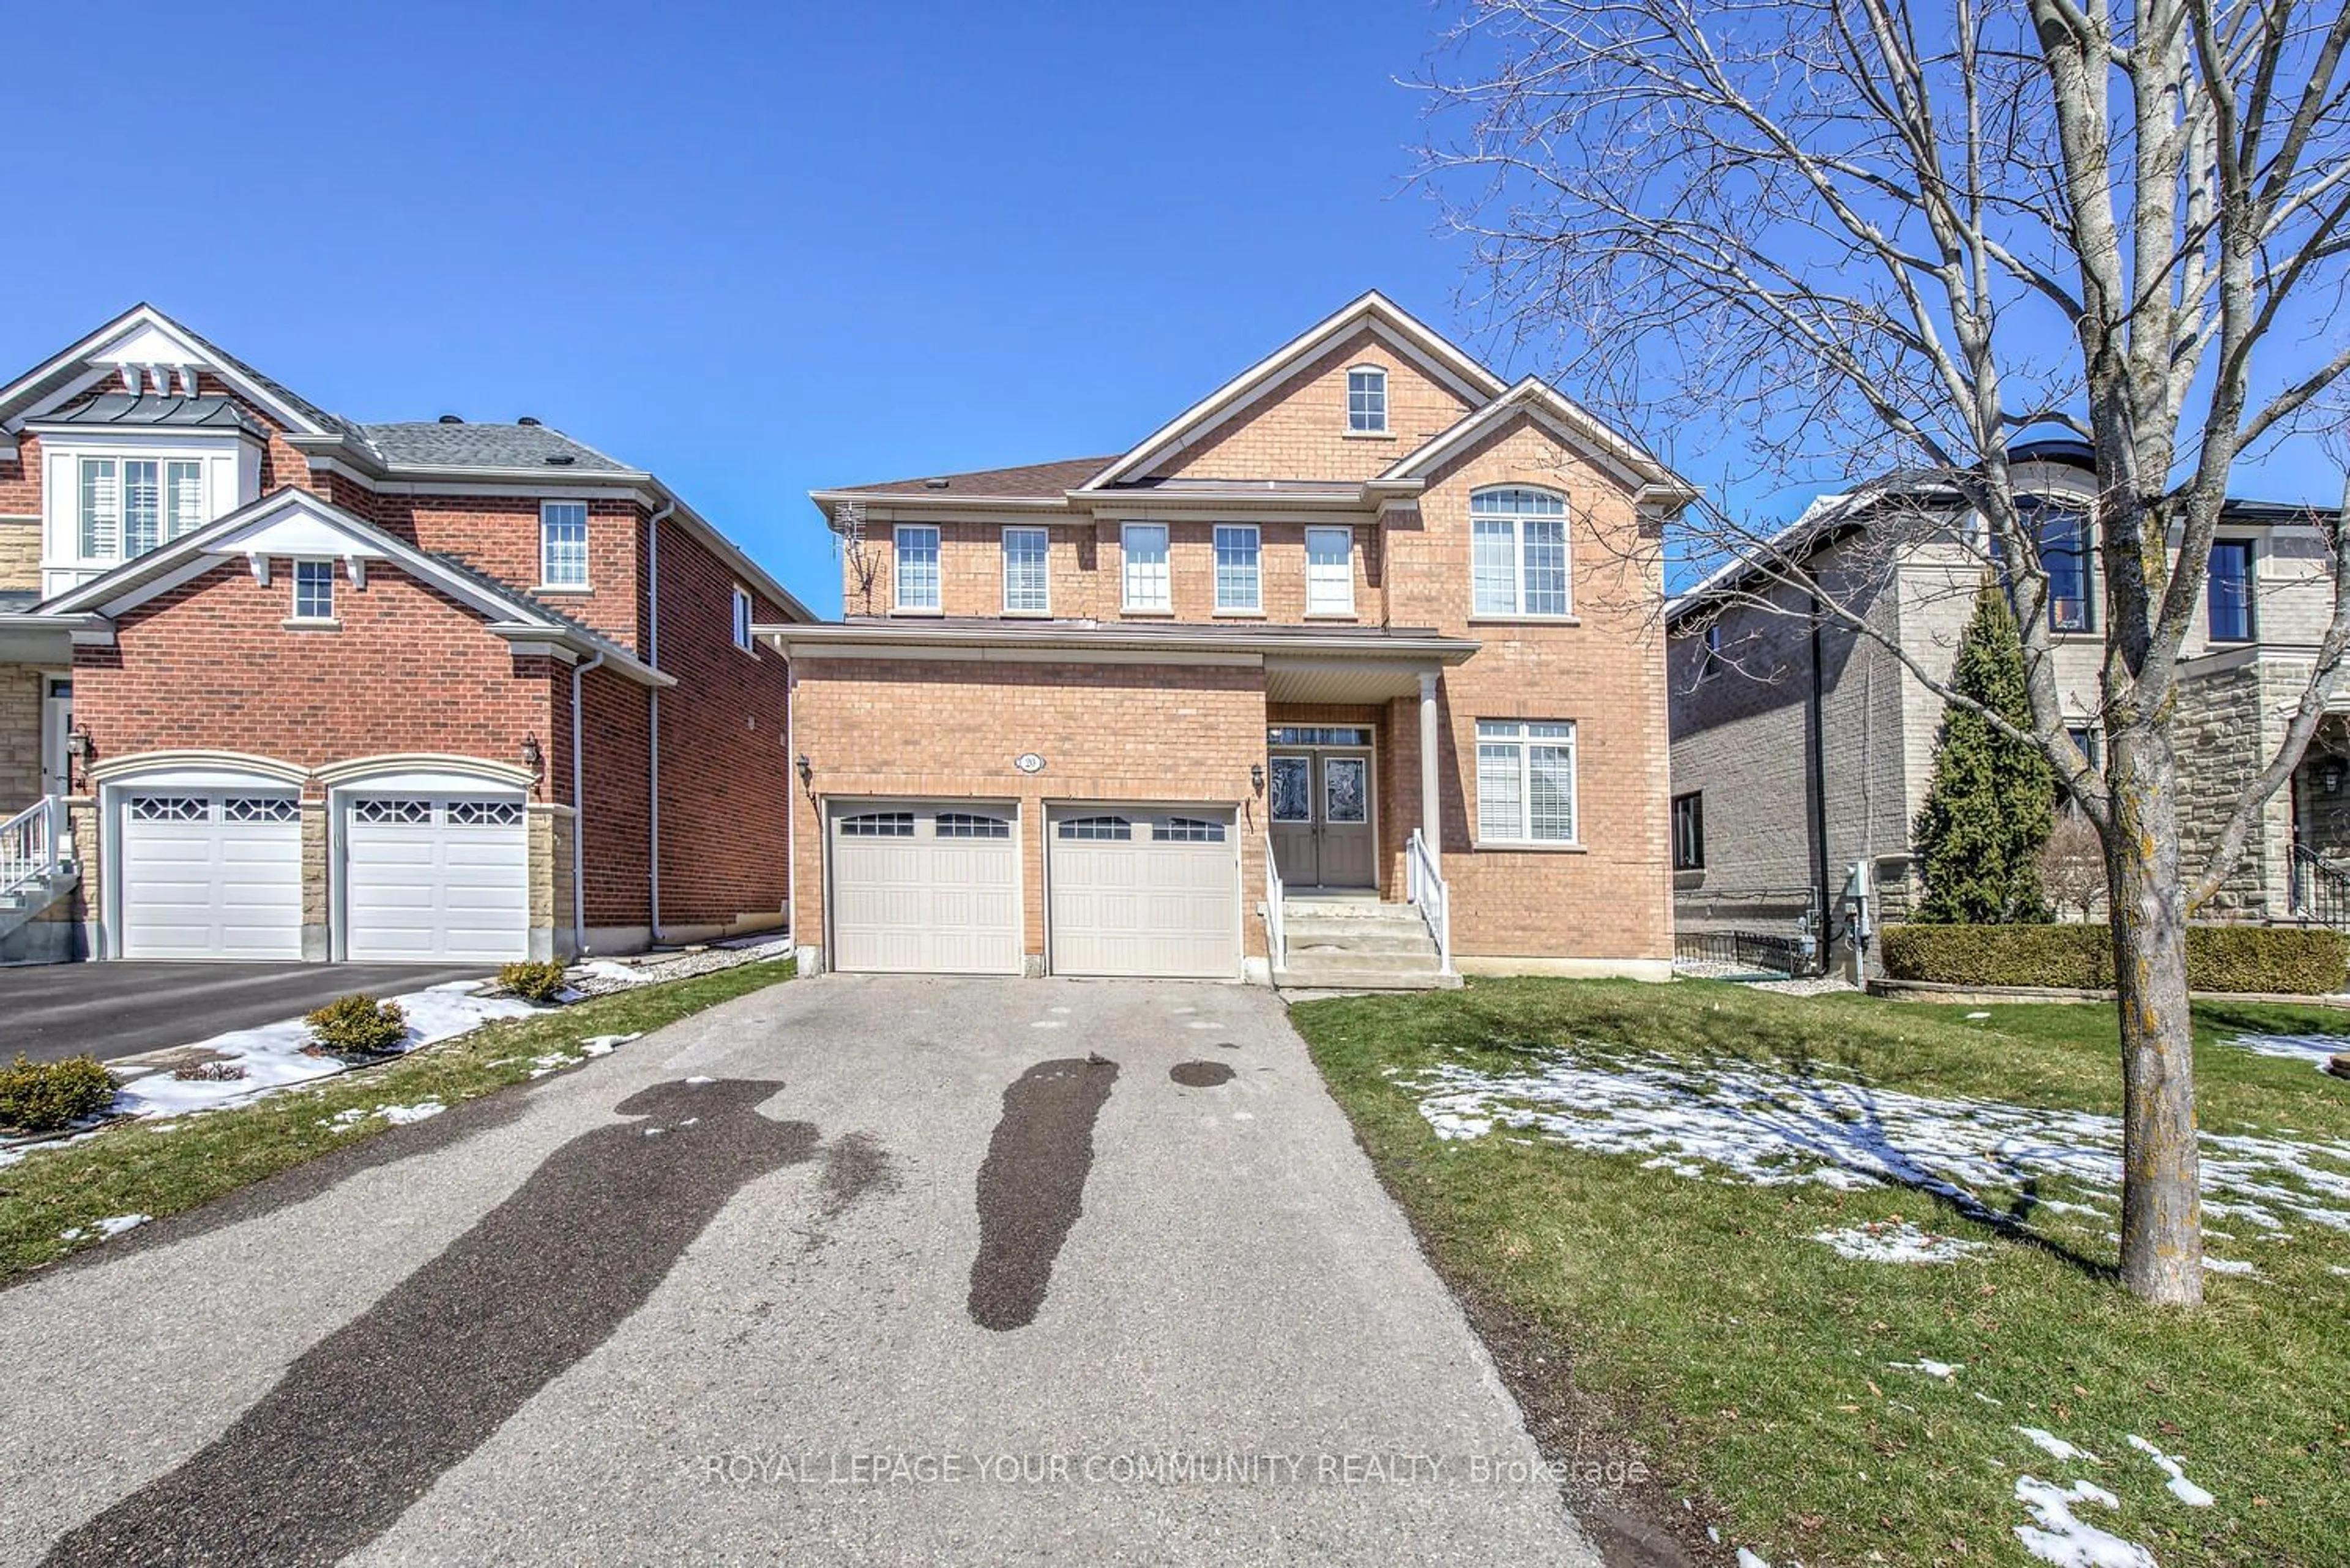 Home with brick exterior material for 20 Wolf Trail Cres, Richmond Hill Ontario L4E 4K1